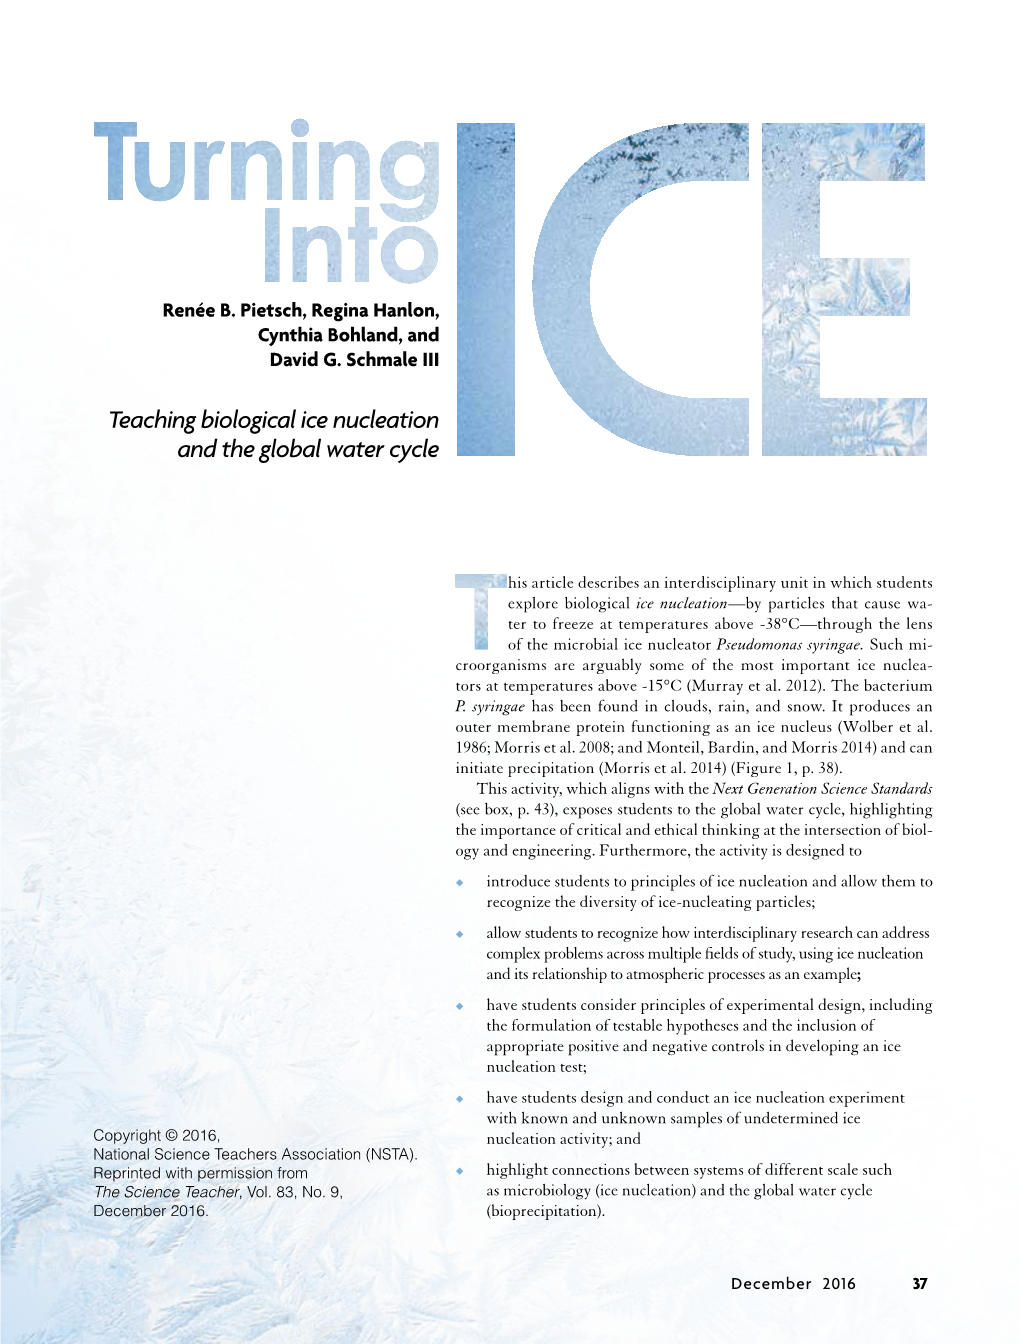 Teaching Biological Ice Nucleation and the Global Water Cycle